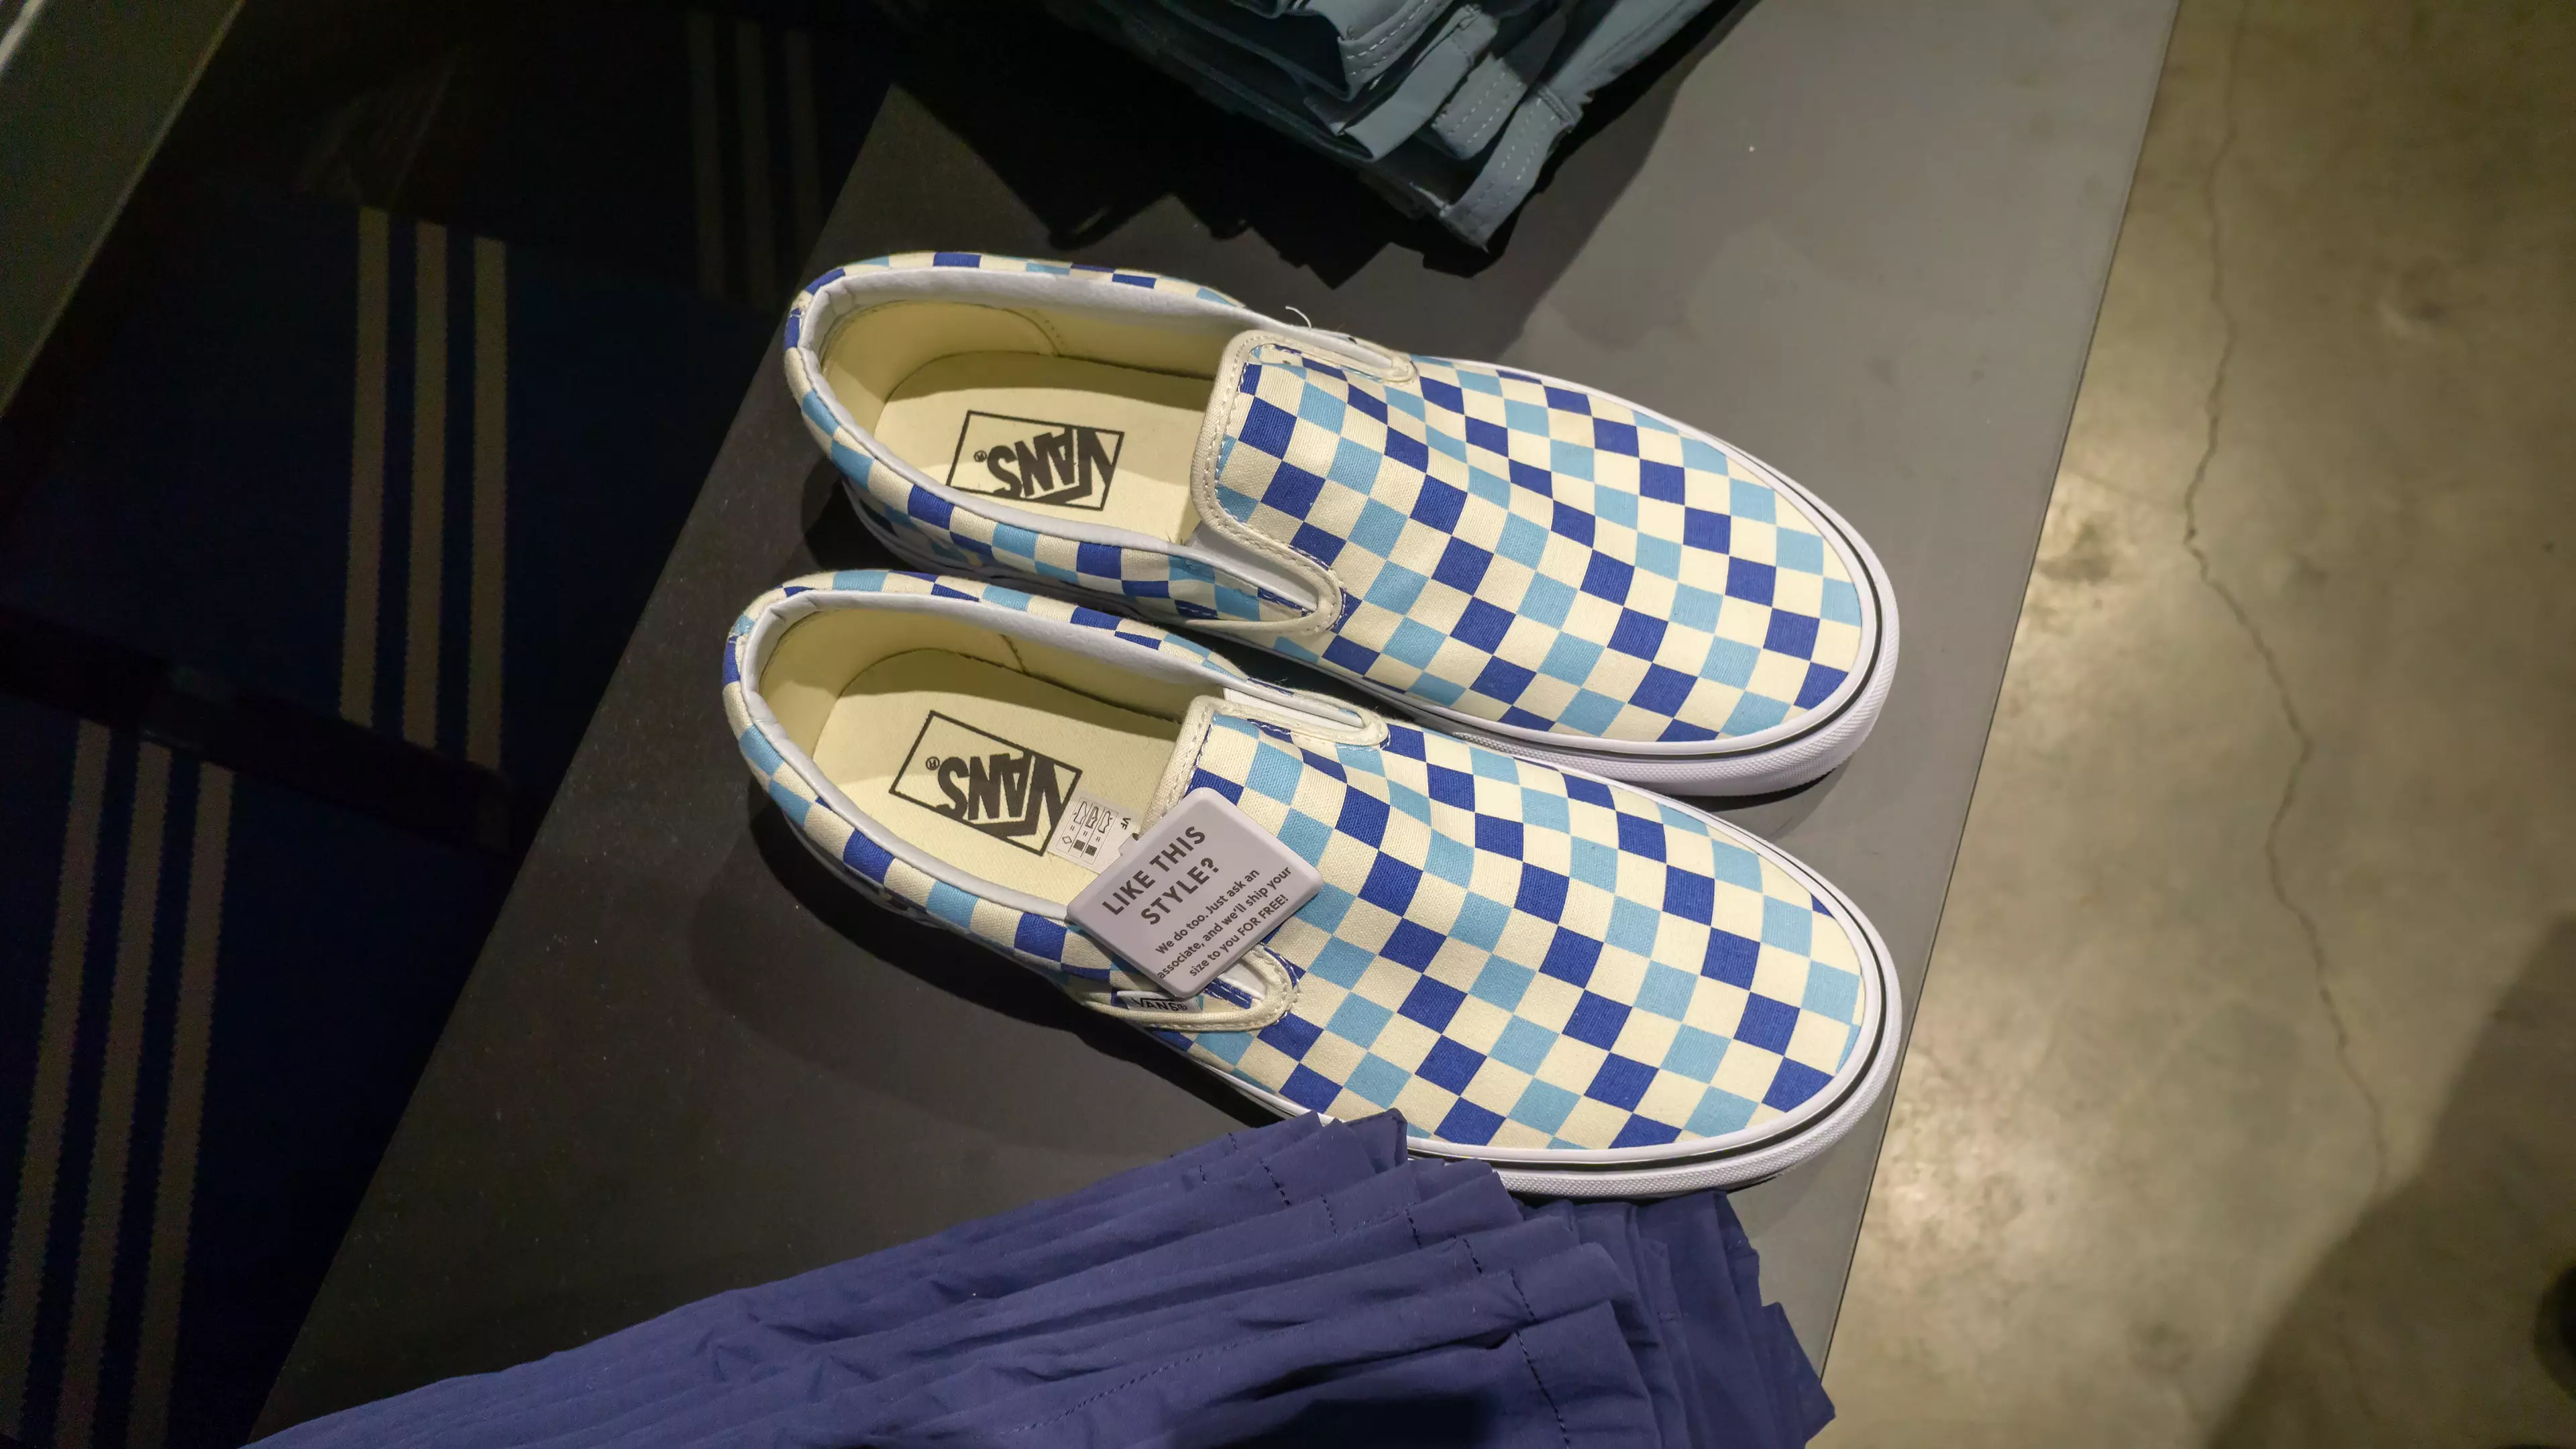 Man Tests Theory That Vans Always Land On The Sole And It's Freaky